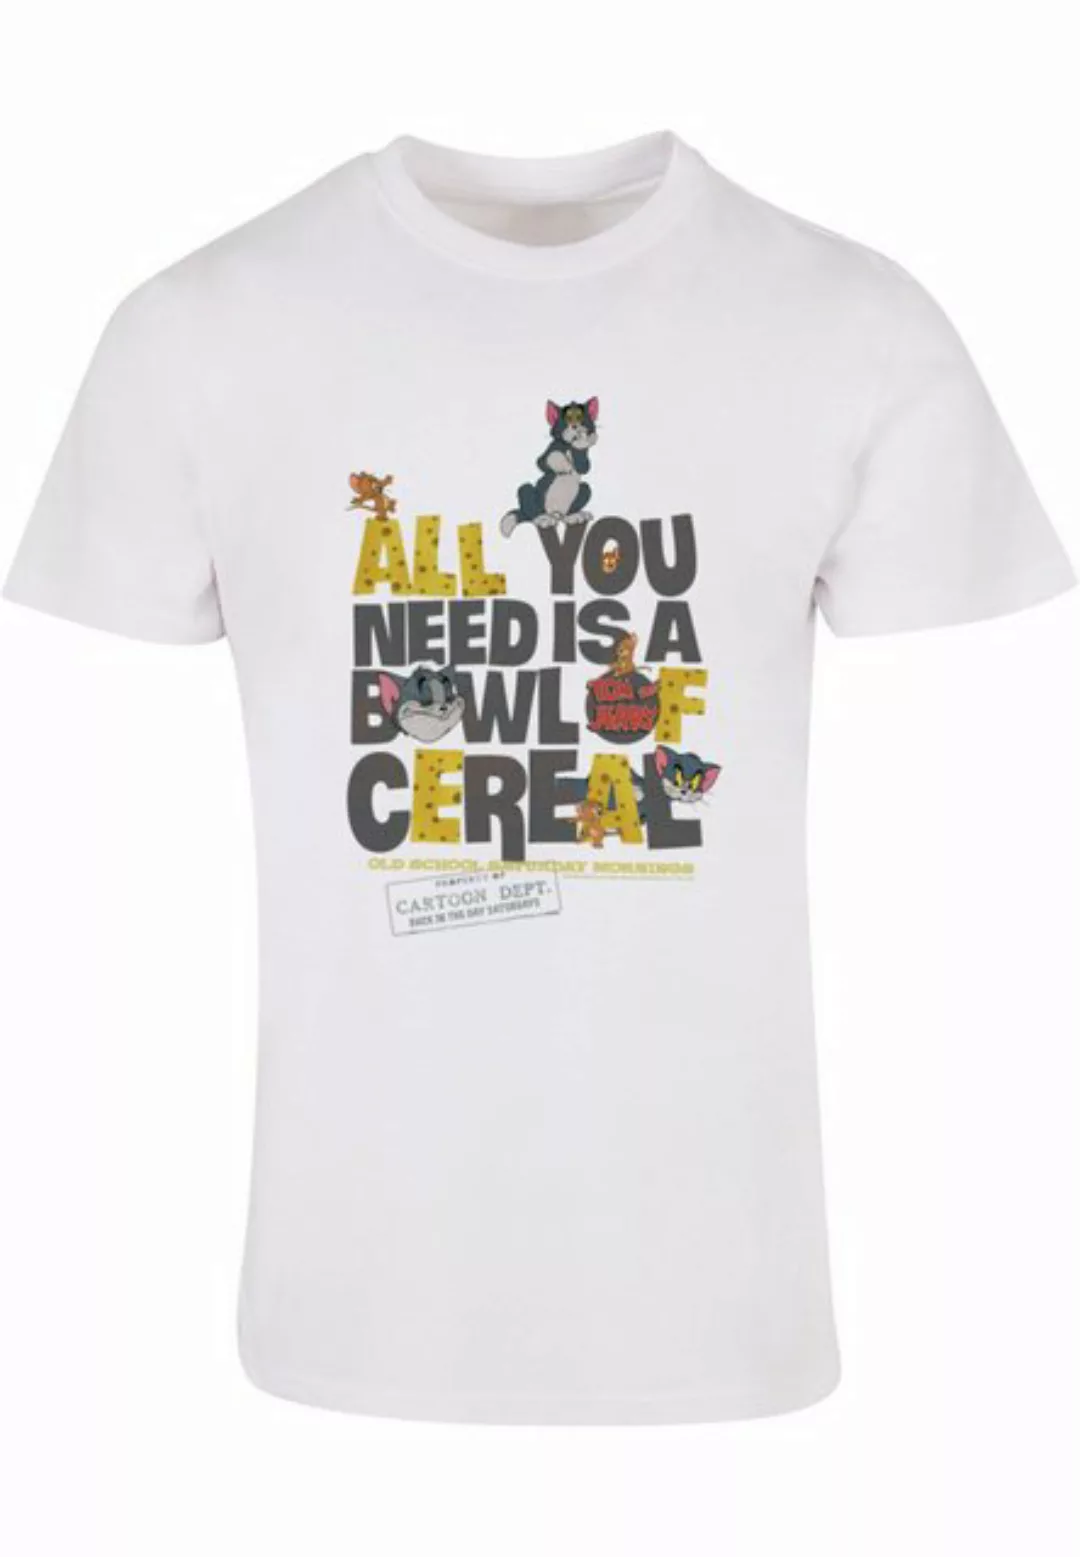 ABSOLUTE CULT T-Shirt ABSOLUTE CULT Herren Tom and Jerry - All You Need Is günstig online kaufen